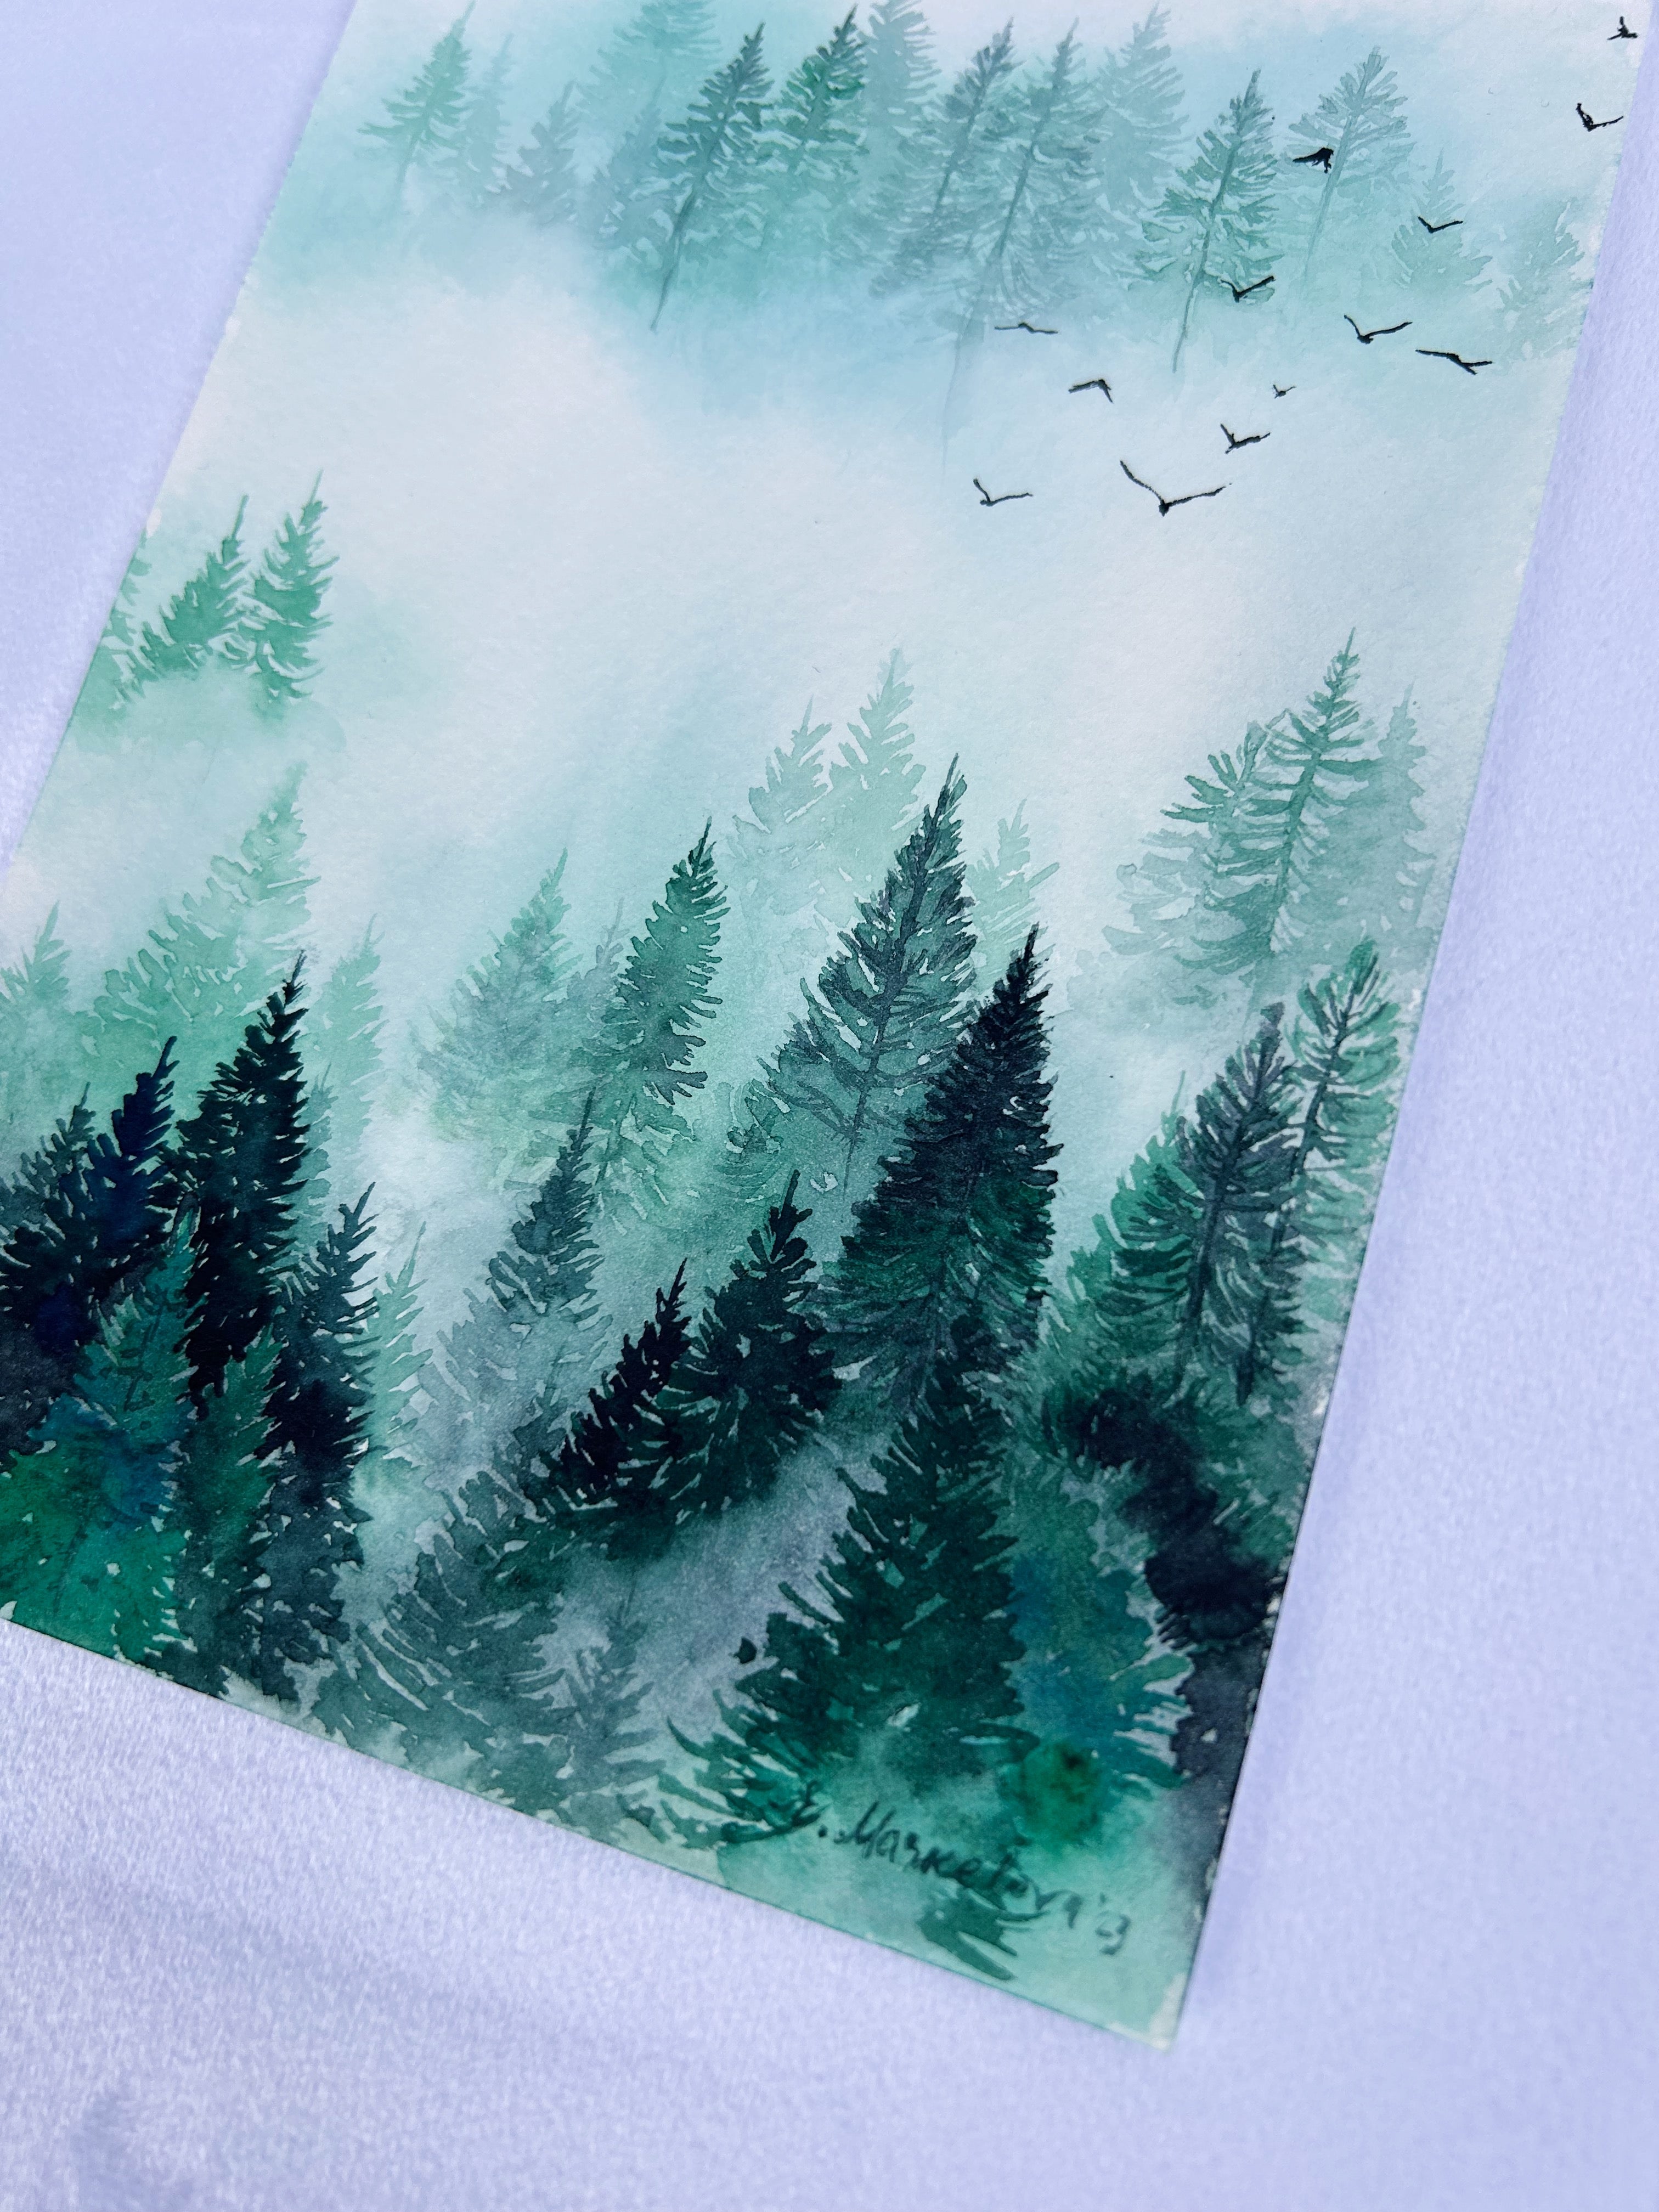 Tranquility II - Original Watercolor Painting